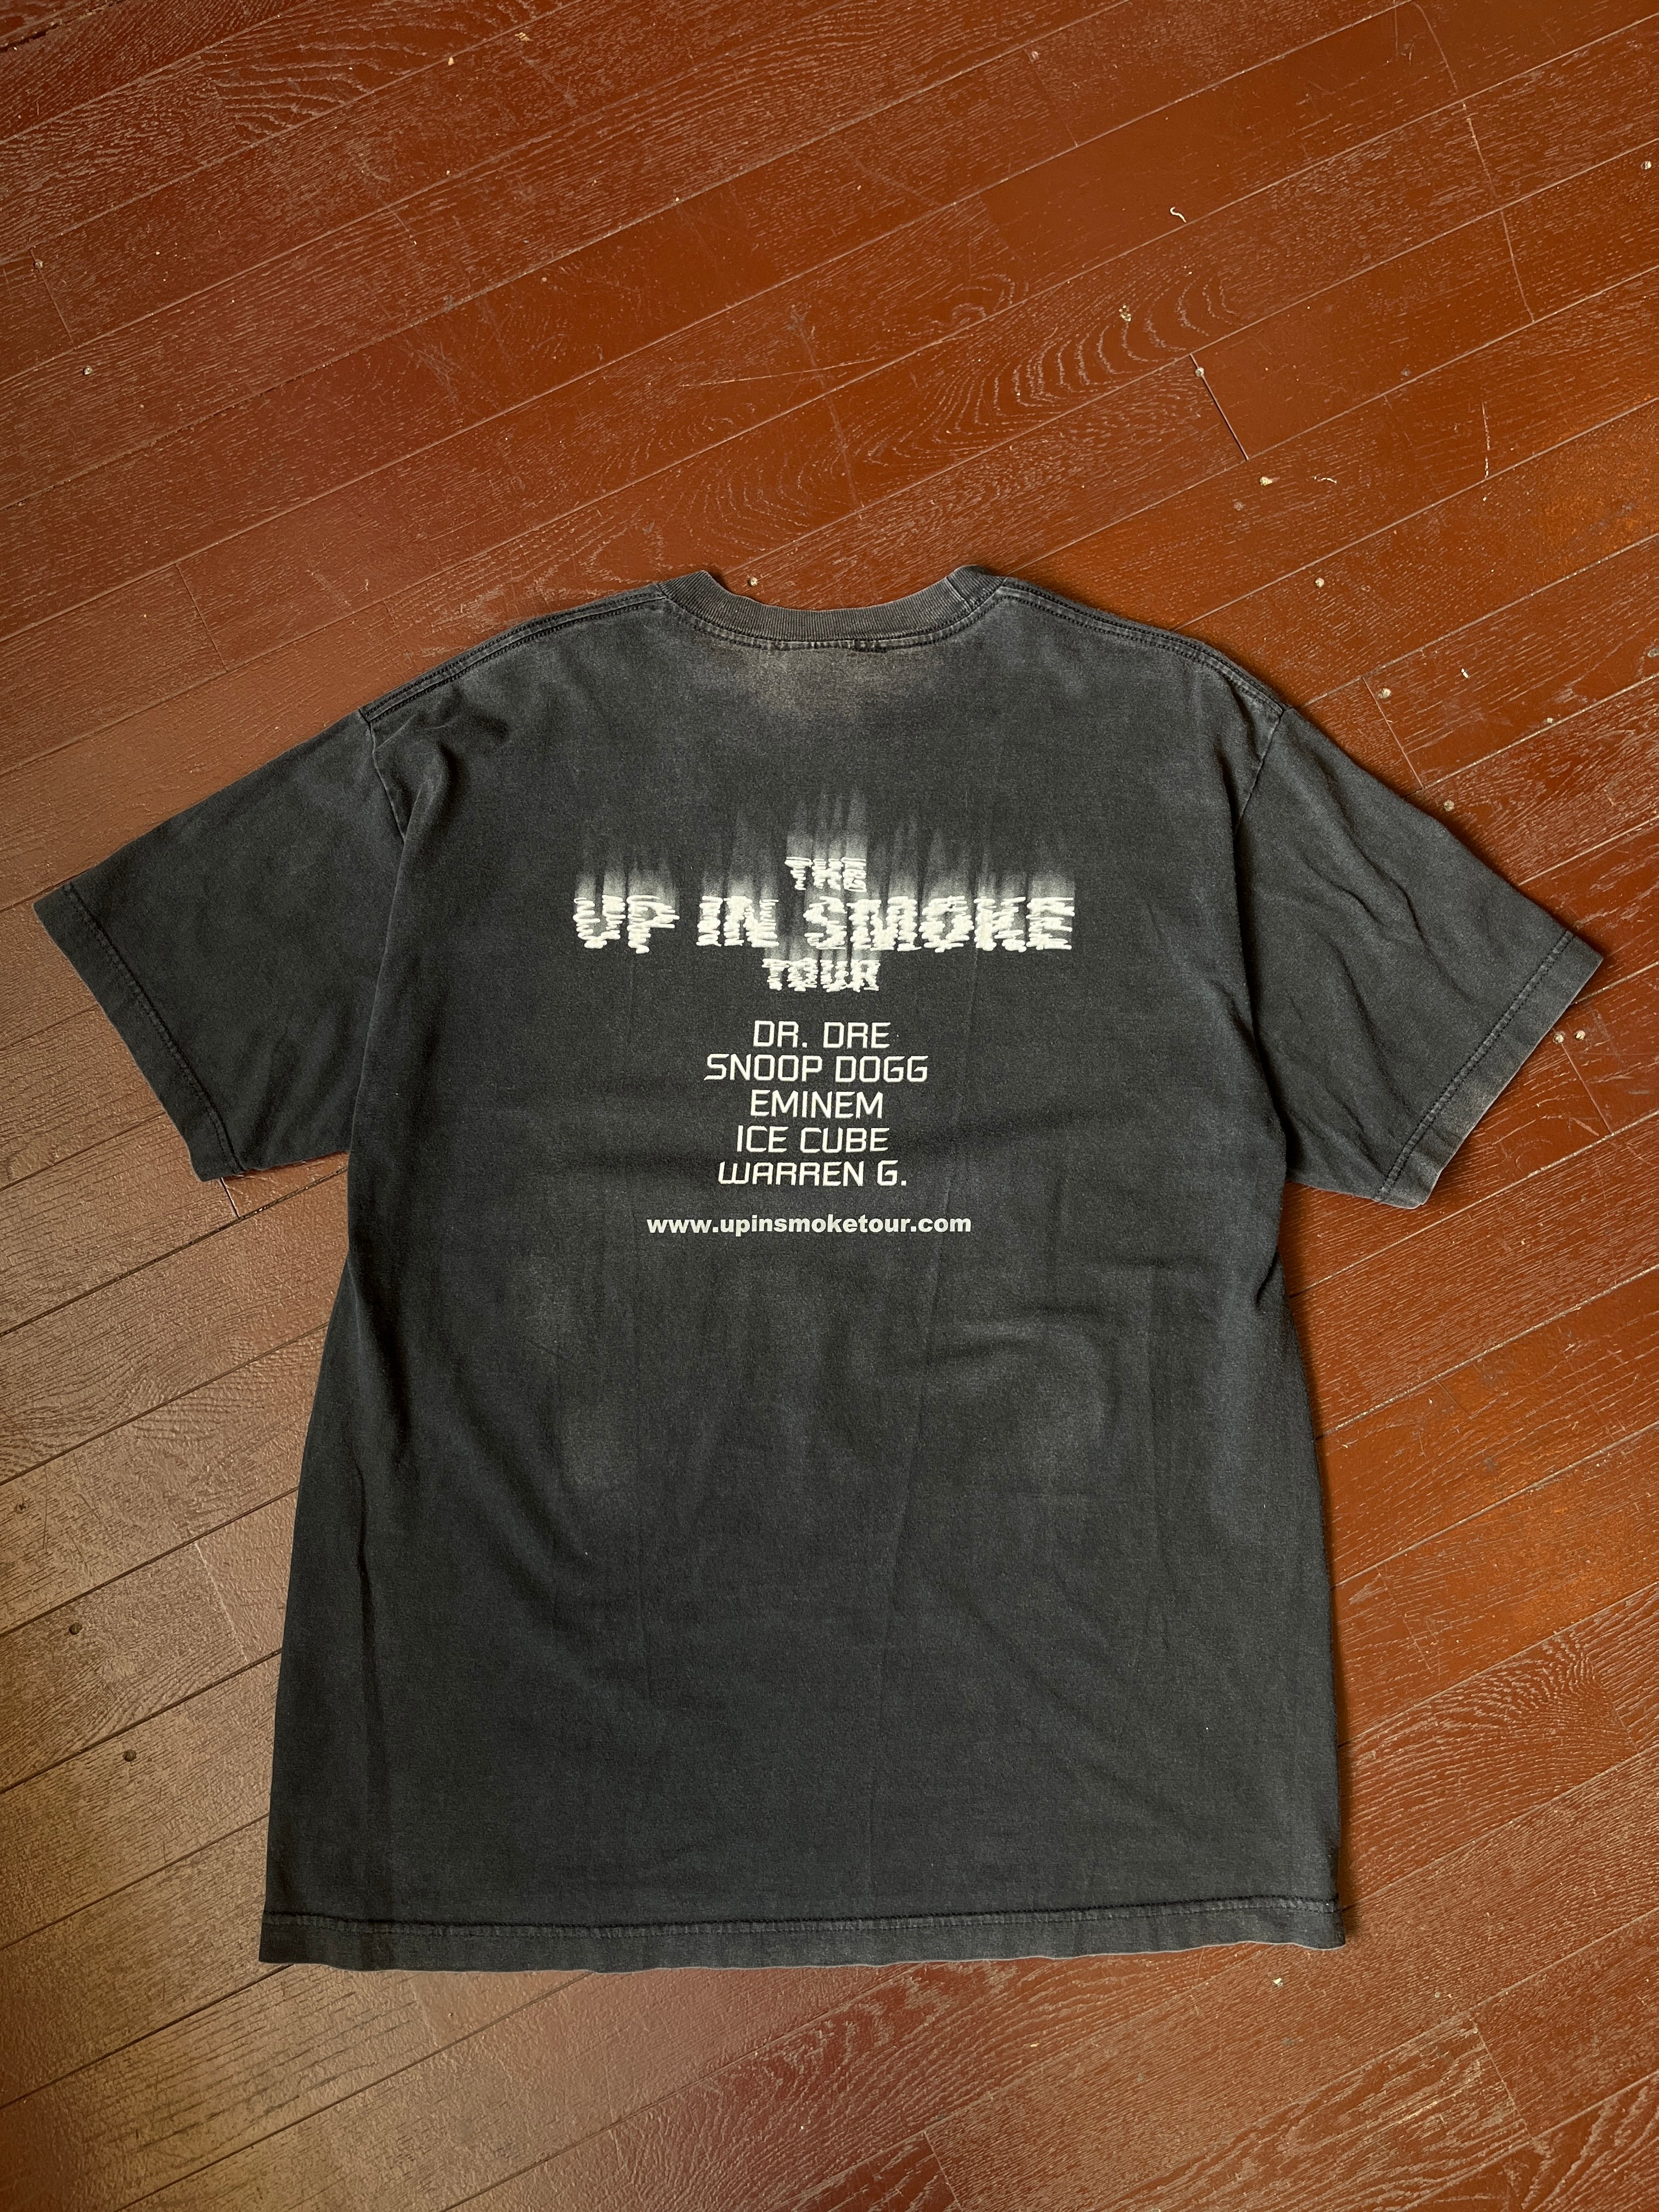 2000 Up In Smoke Tour T-shirt XL Dr.dre Snoop Dogg Eminem Ice Cube ...